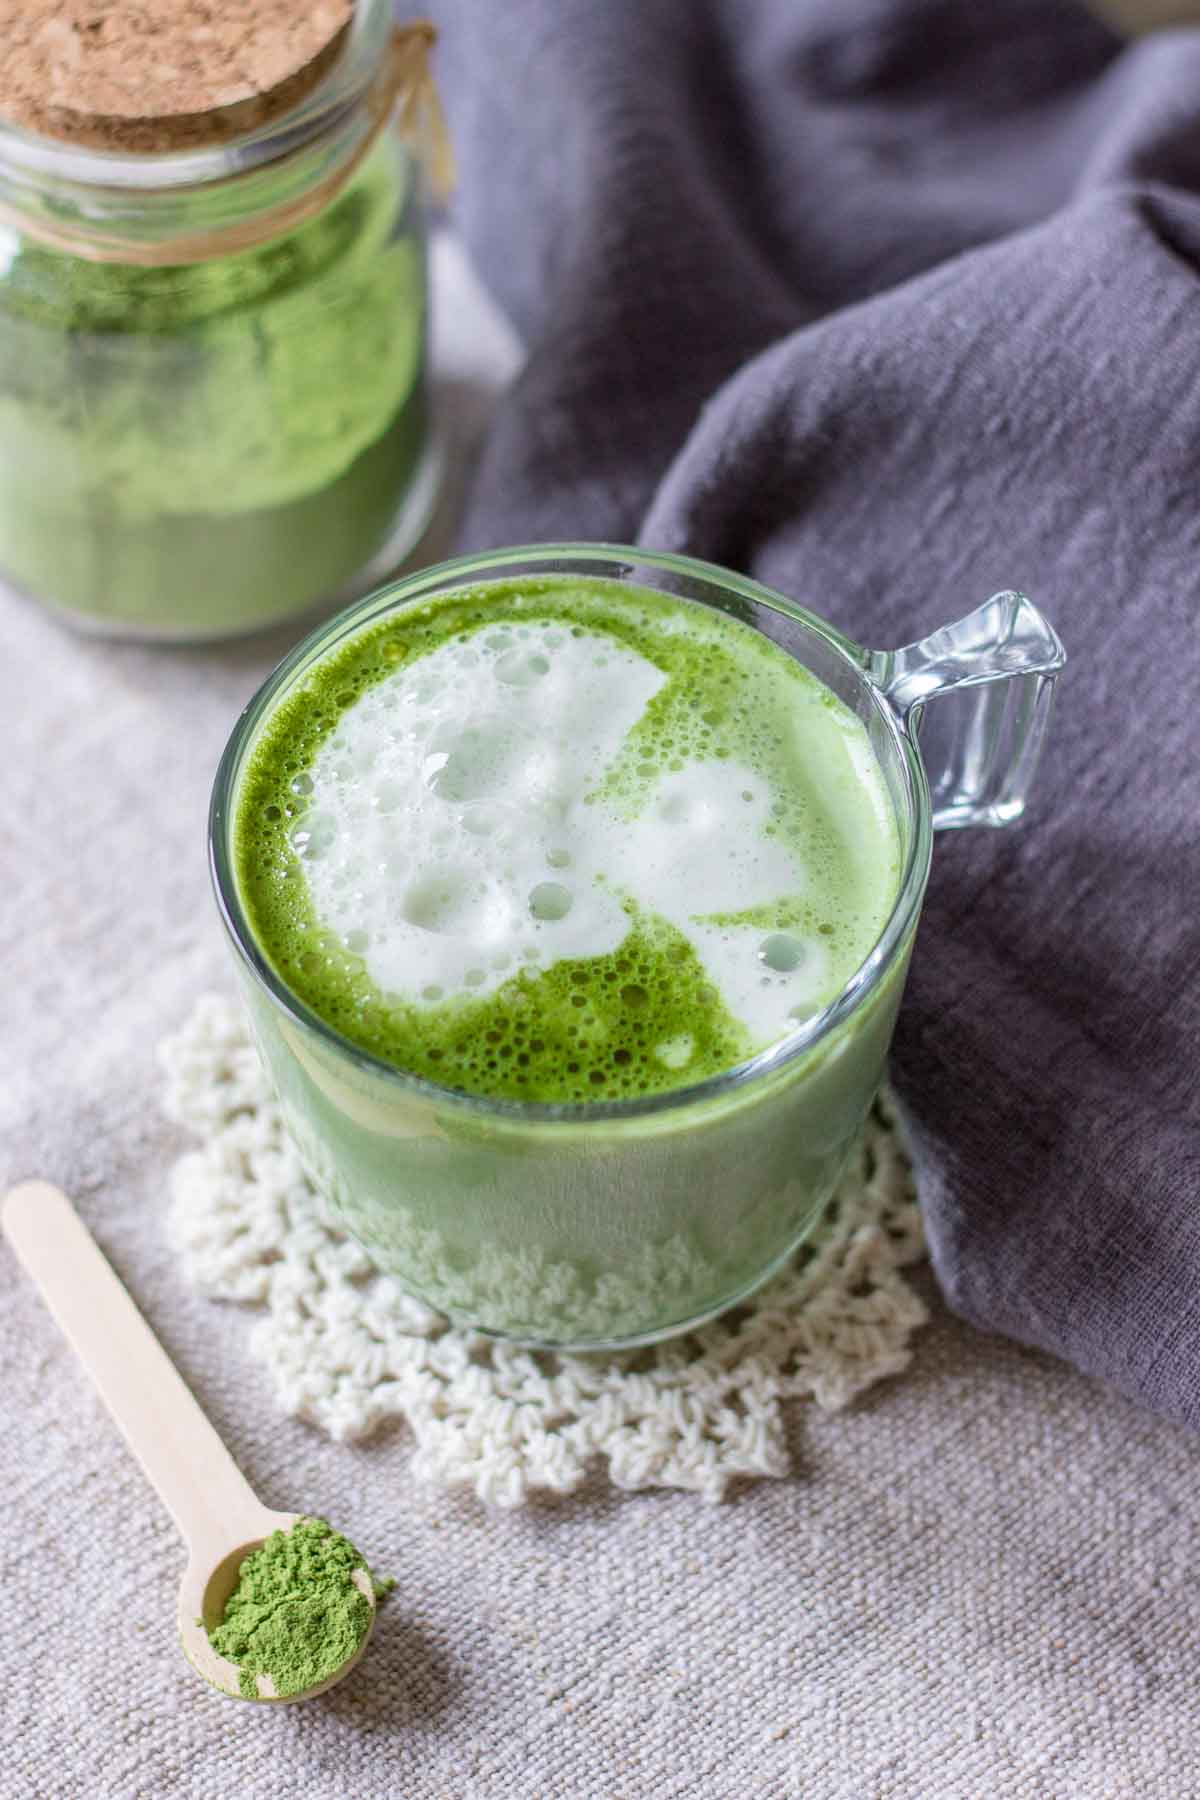 Upper view of a matcha green tea latte served in a mug with frothed milk